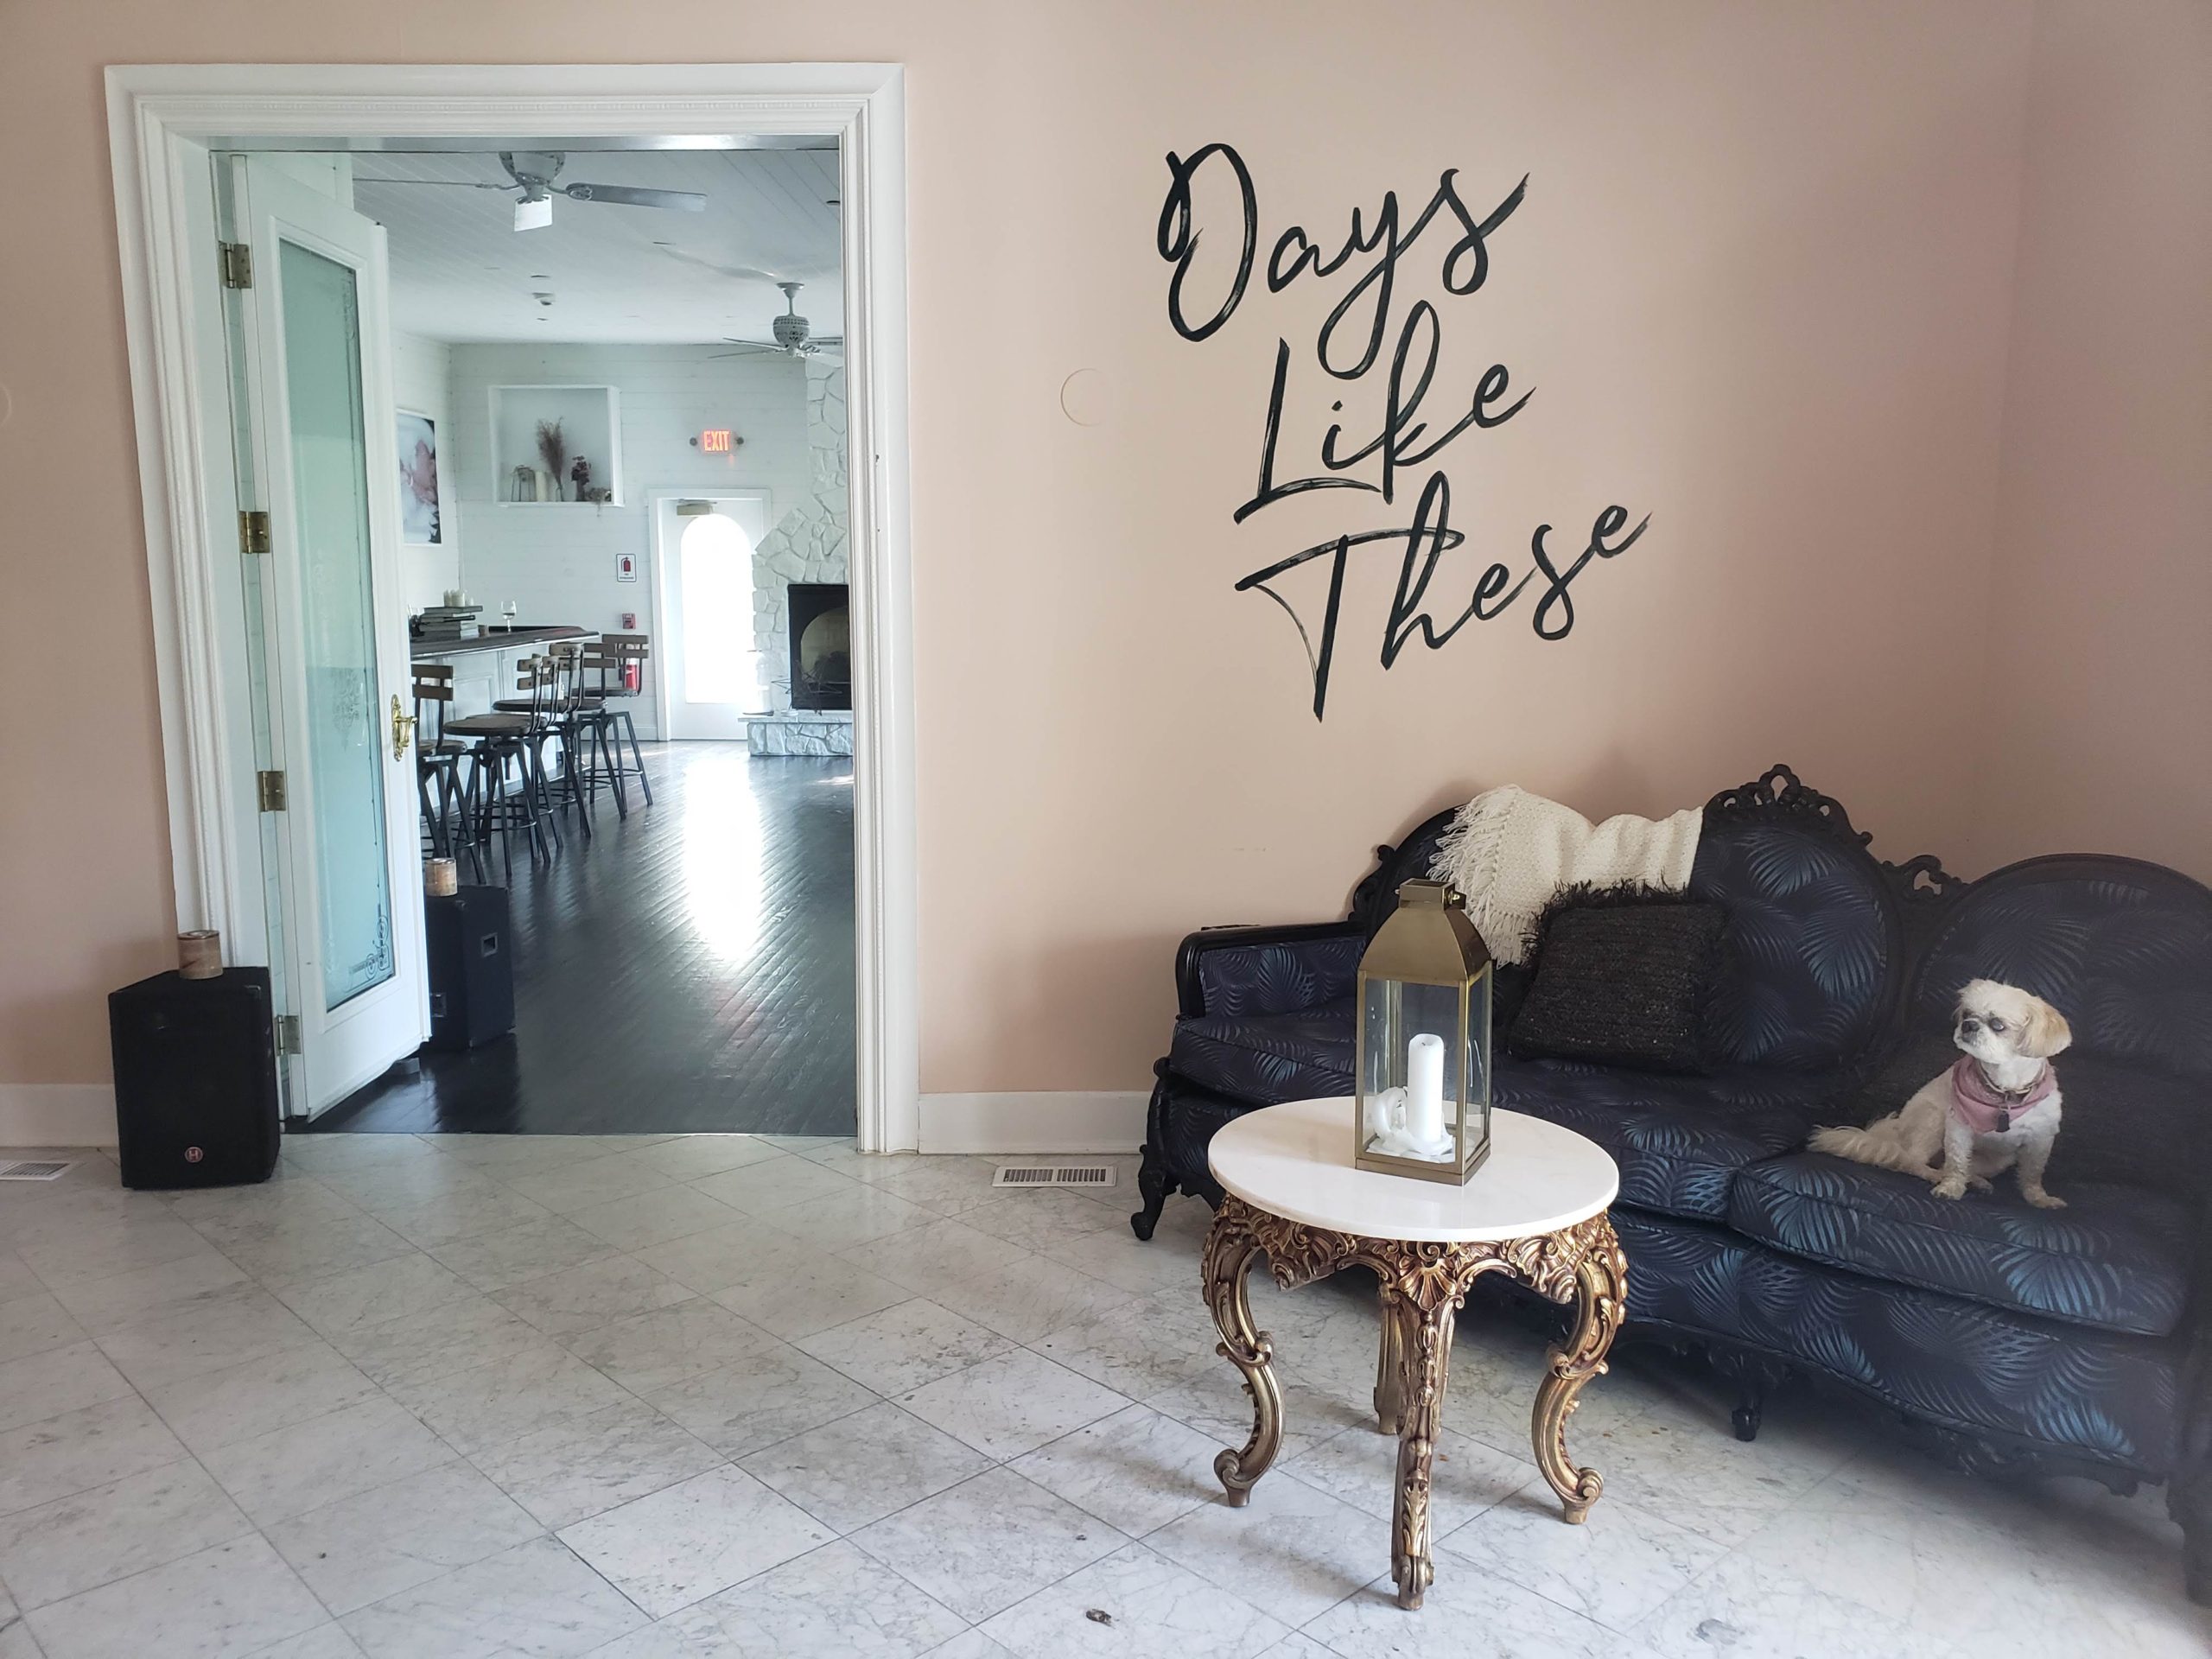 Lin Beach House Review: This charming Airbnb in Long Island comes with a pub